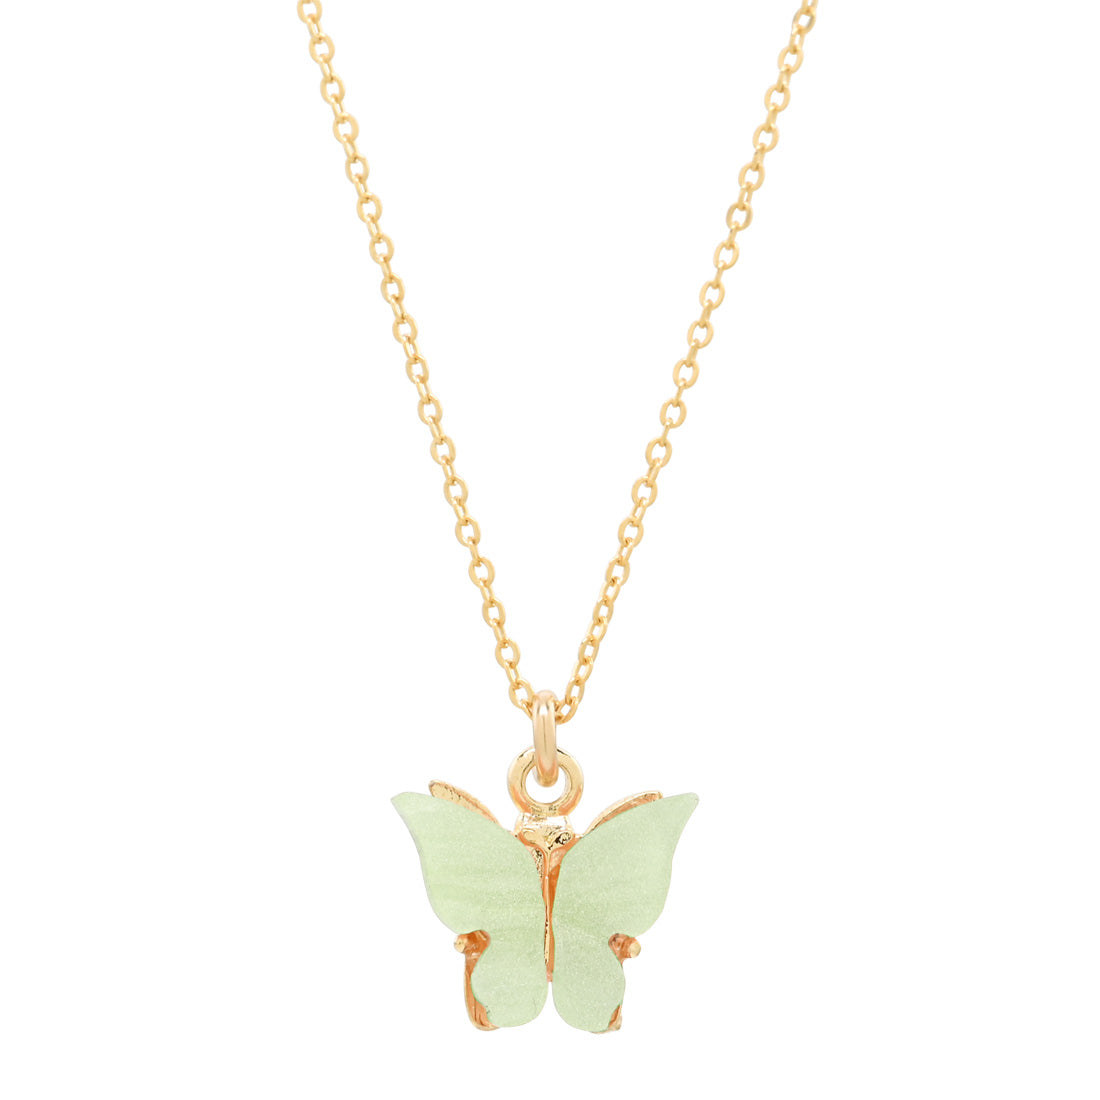 Buy Emerald Green Butterfly Necklace Online in India - Etsy